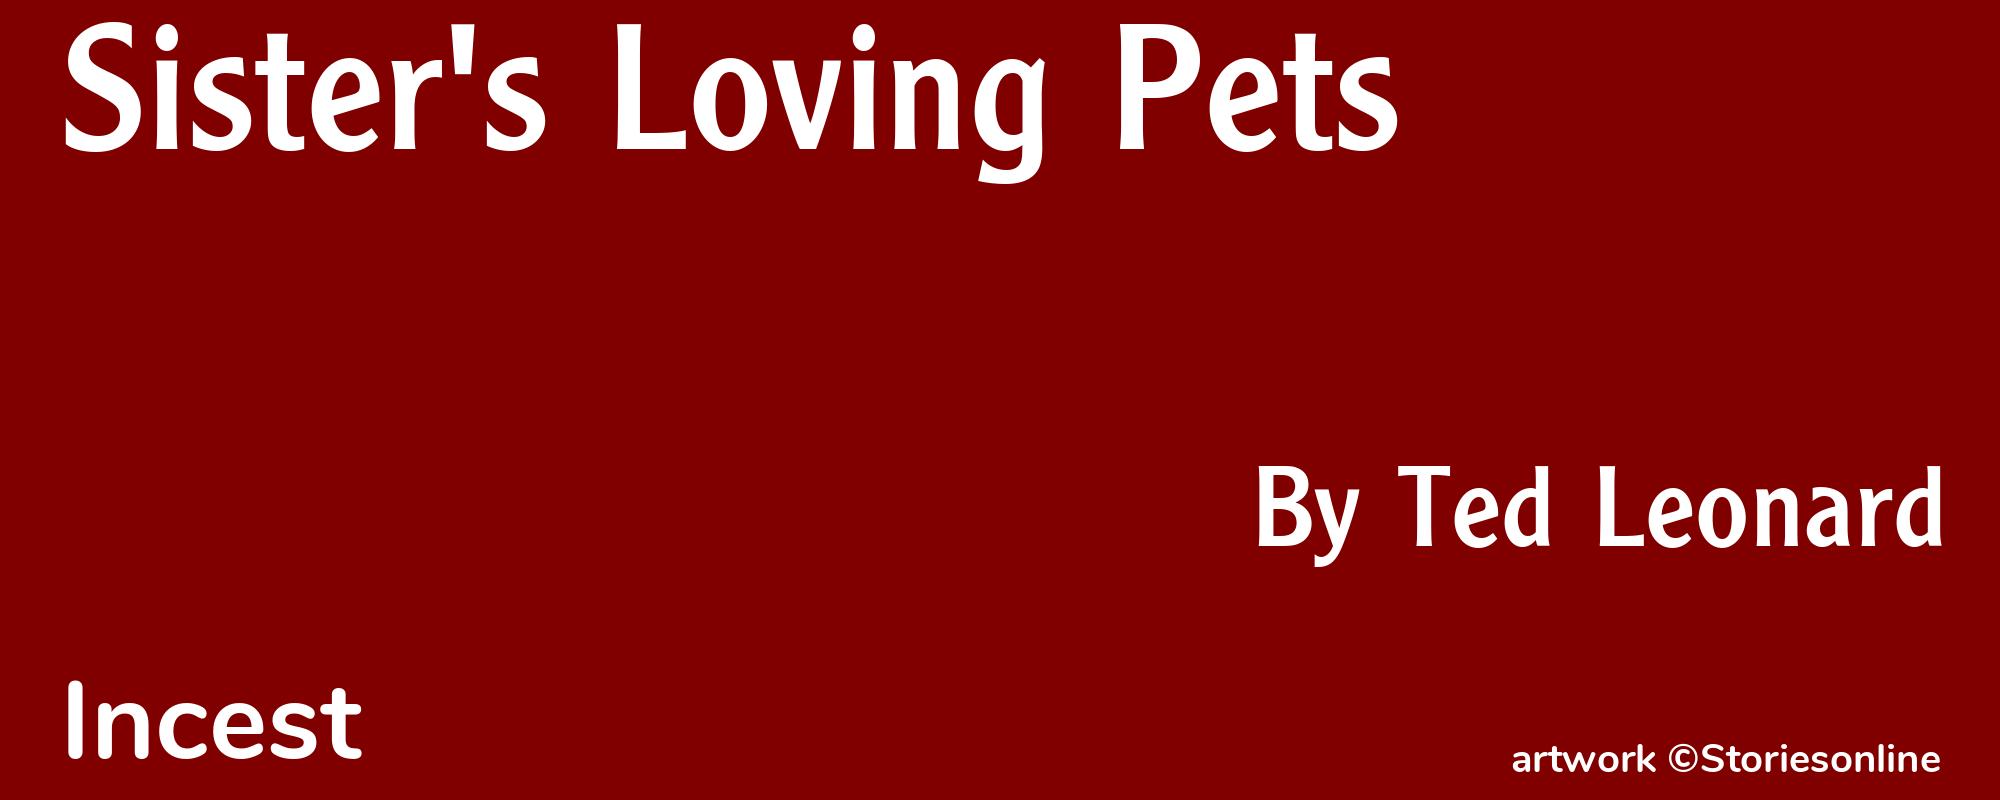 Sister's Loving Pets - Cover